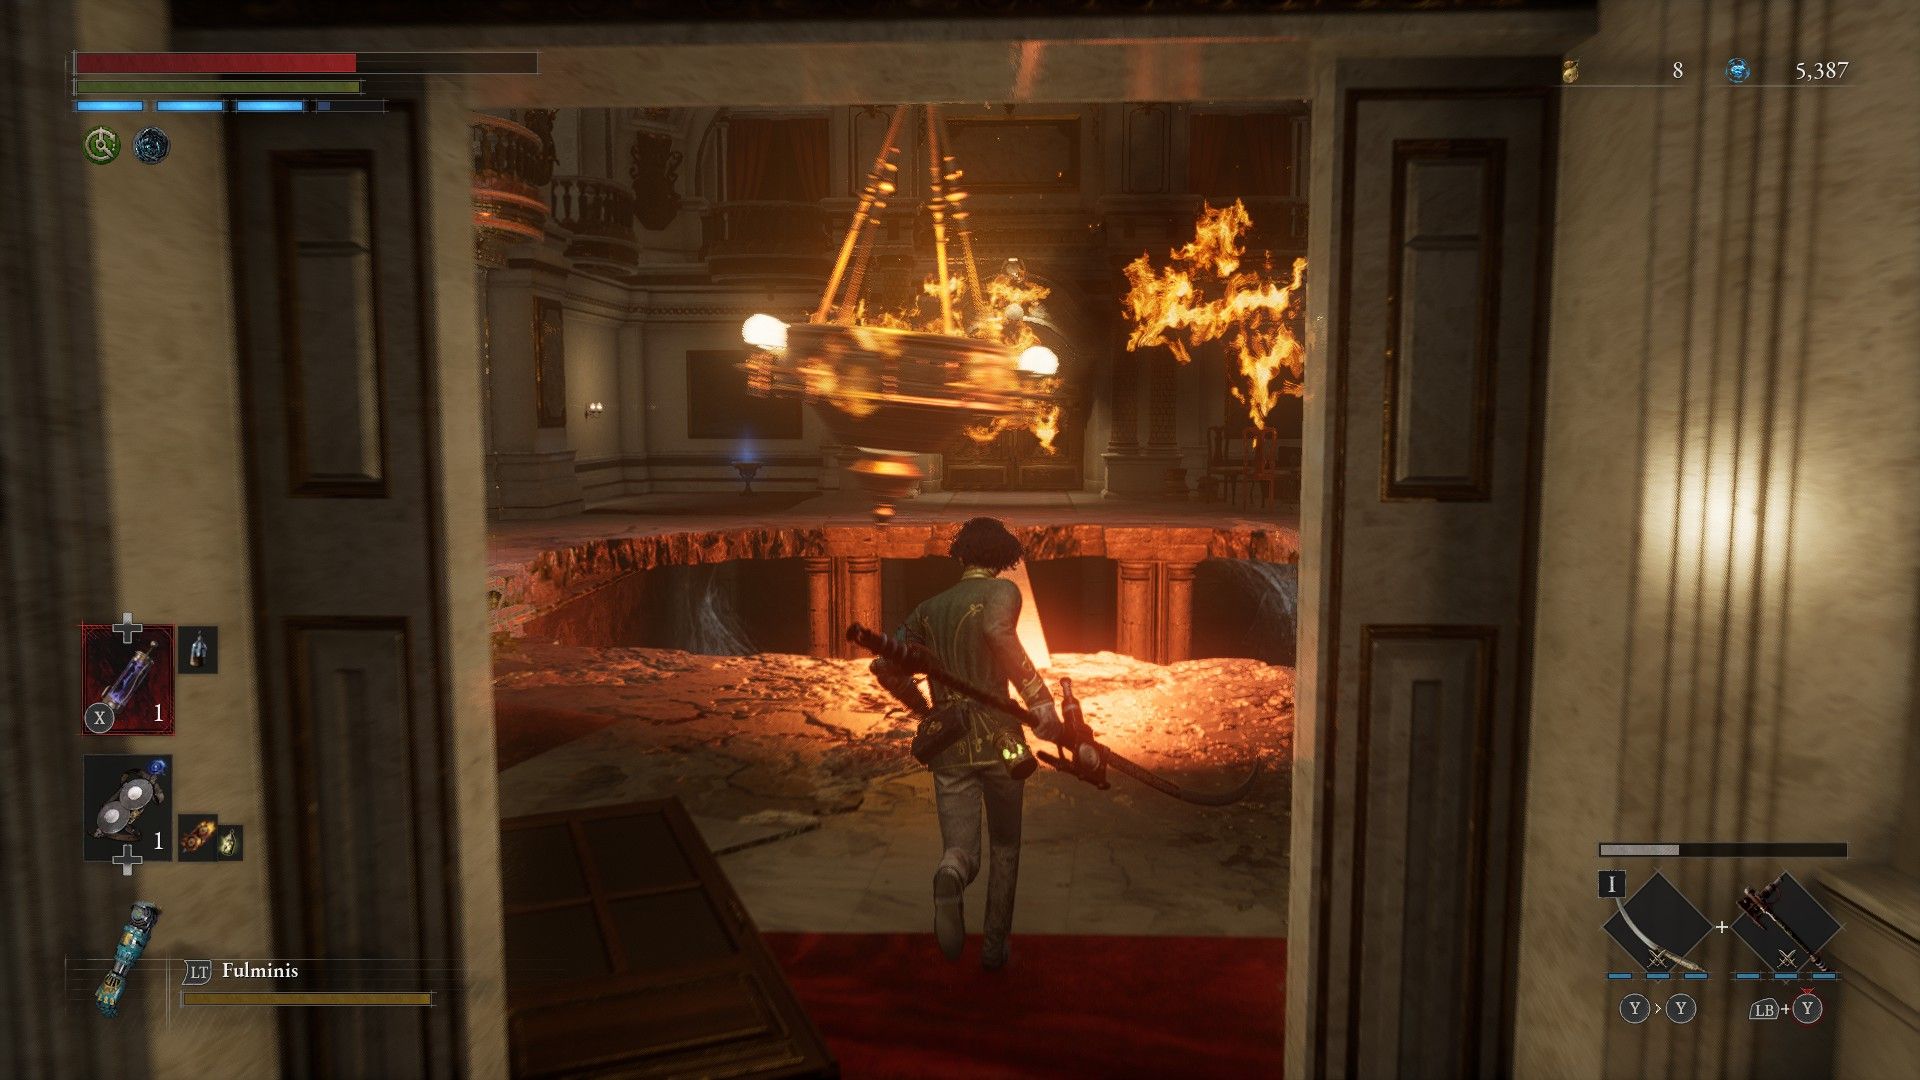 P runs into room with swinging fire chandelier to reach King of Puppets Boss room in Lies of P